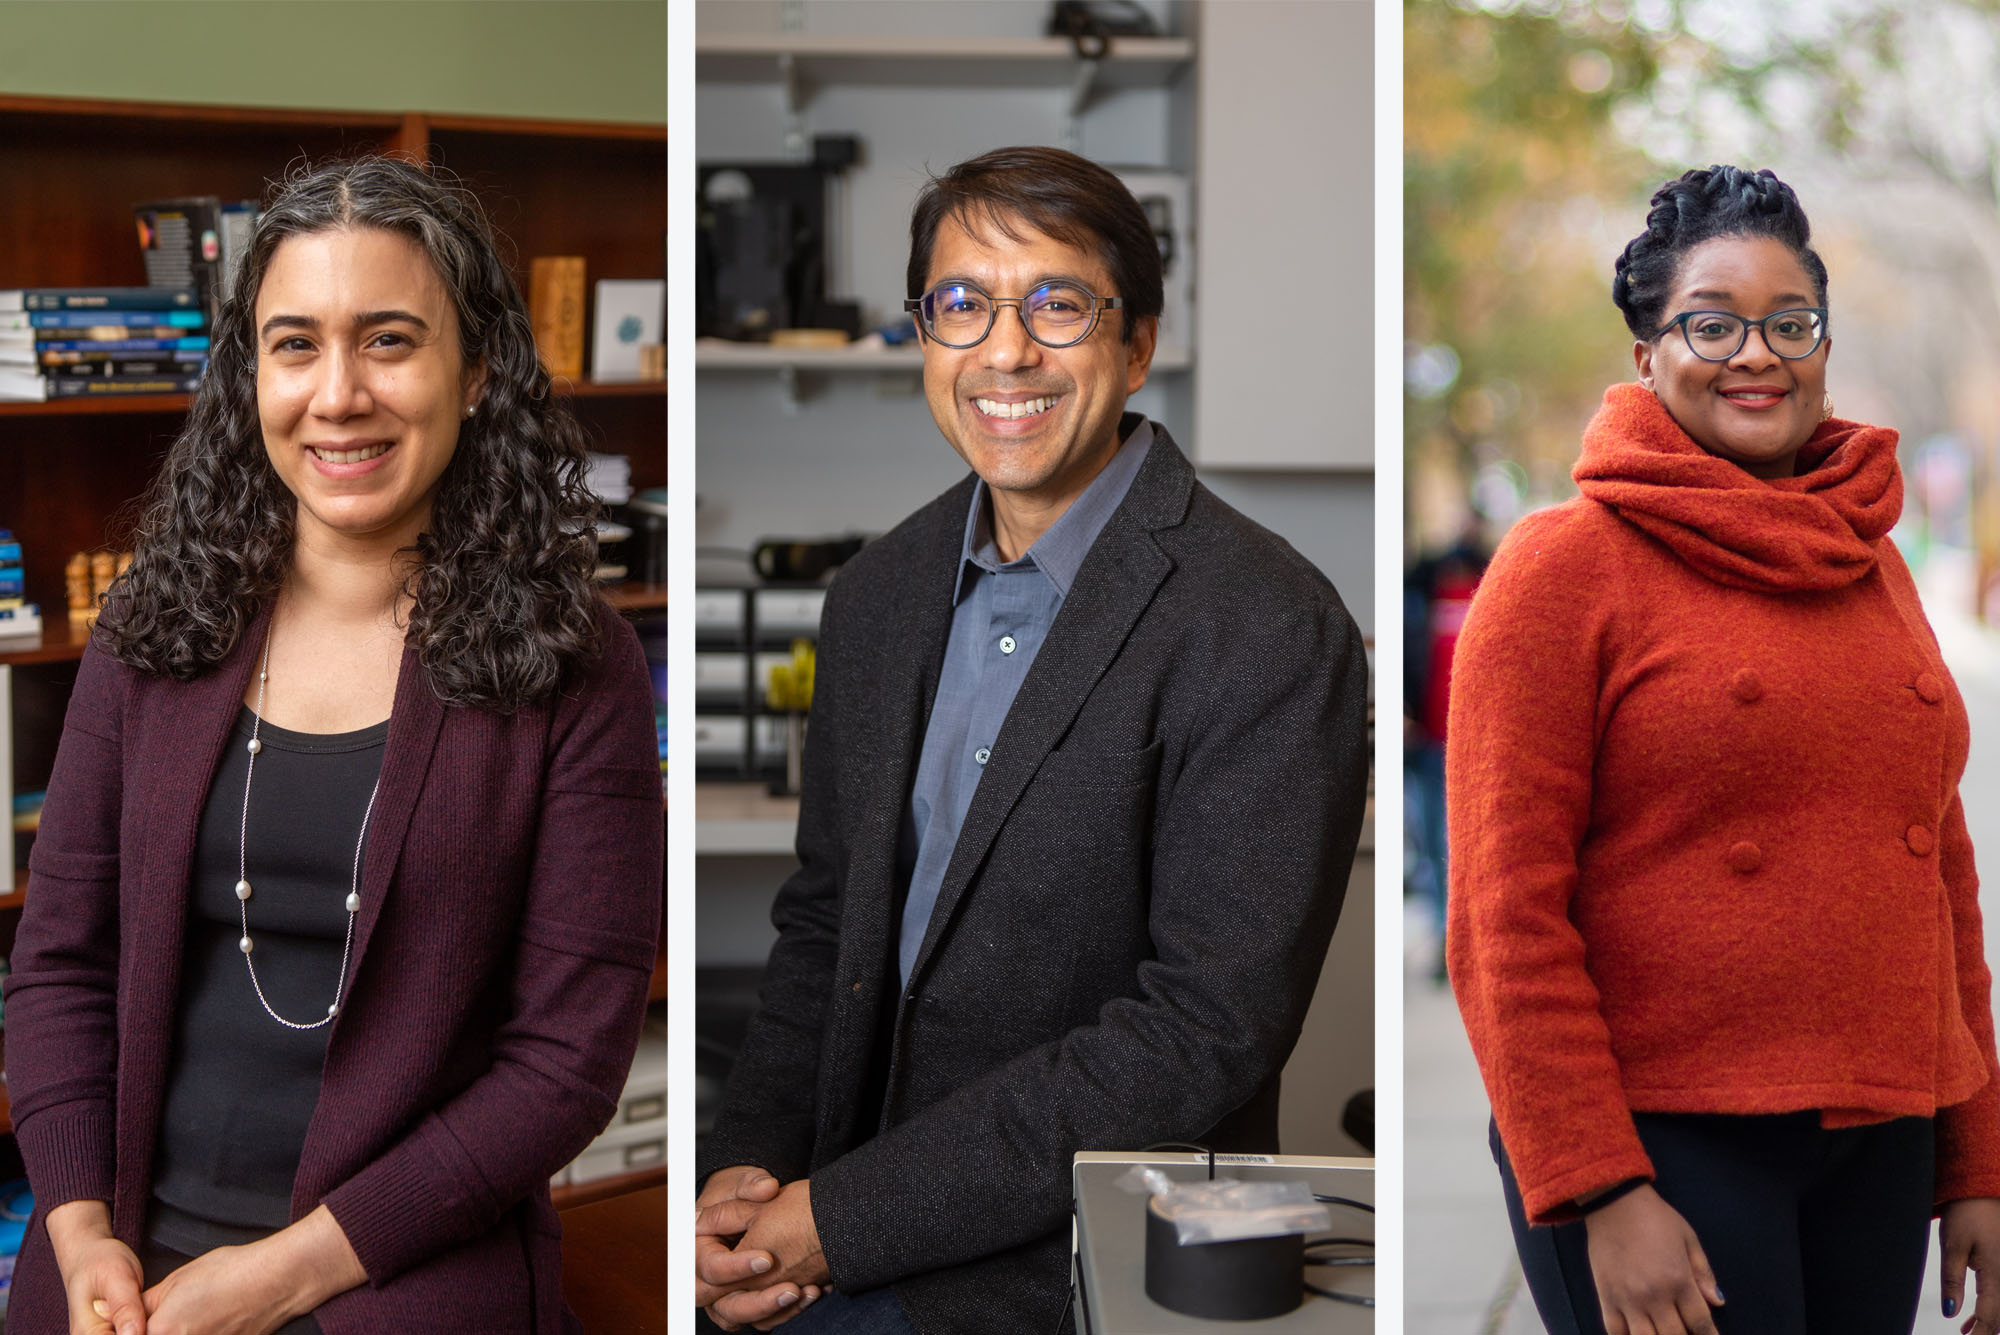 Catherine Espaillat, Vivek Goyal, and Malika Jeffries-EL were all honored by the American Association for the Advancement of Science. Photos by Cydney Scott